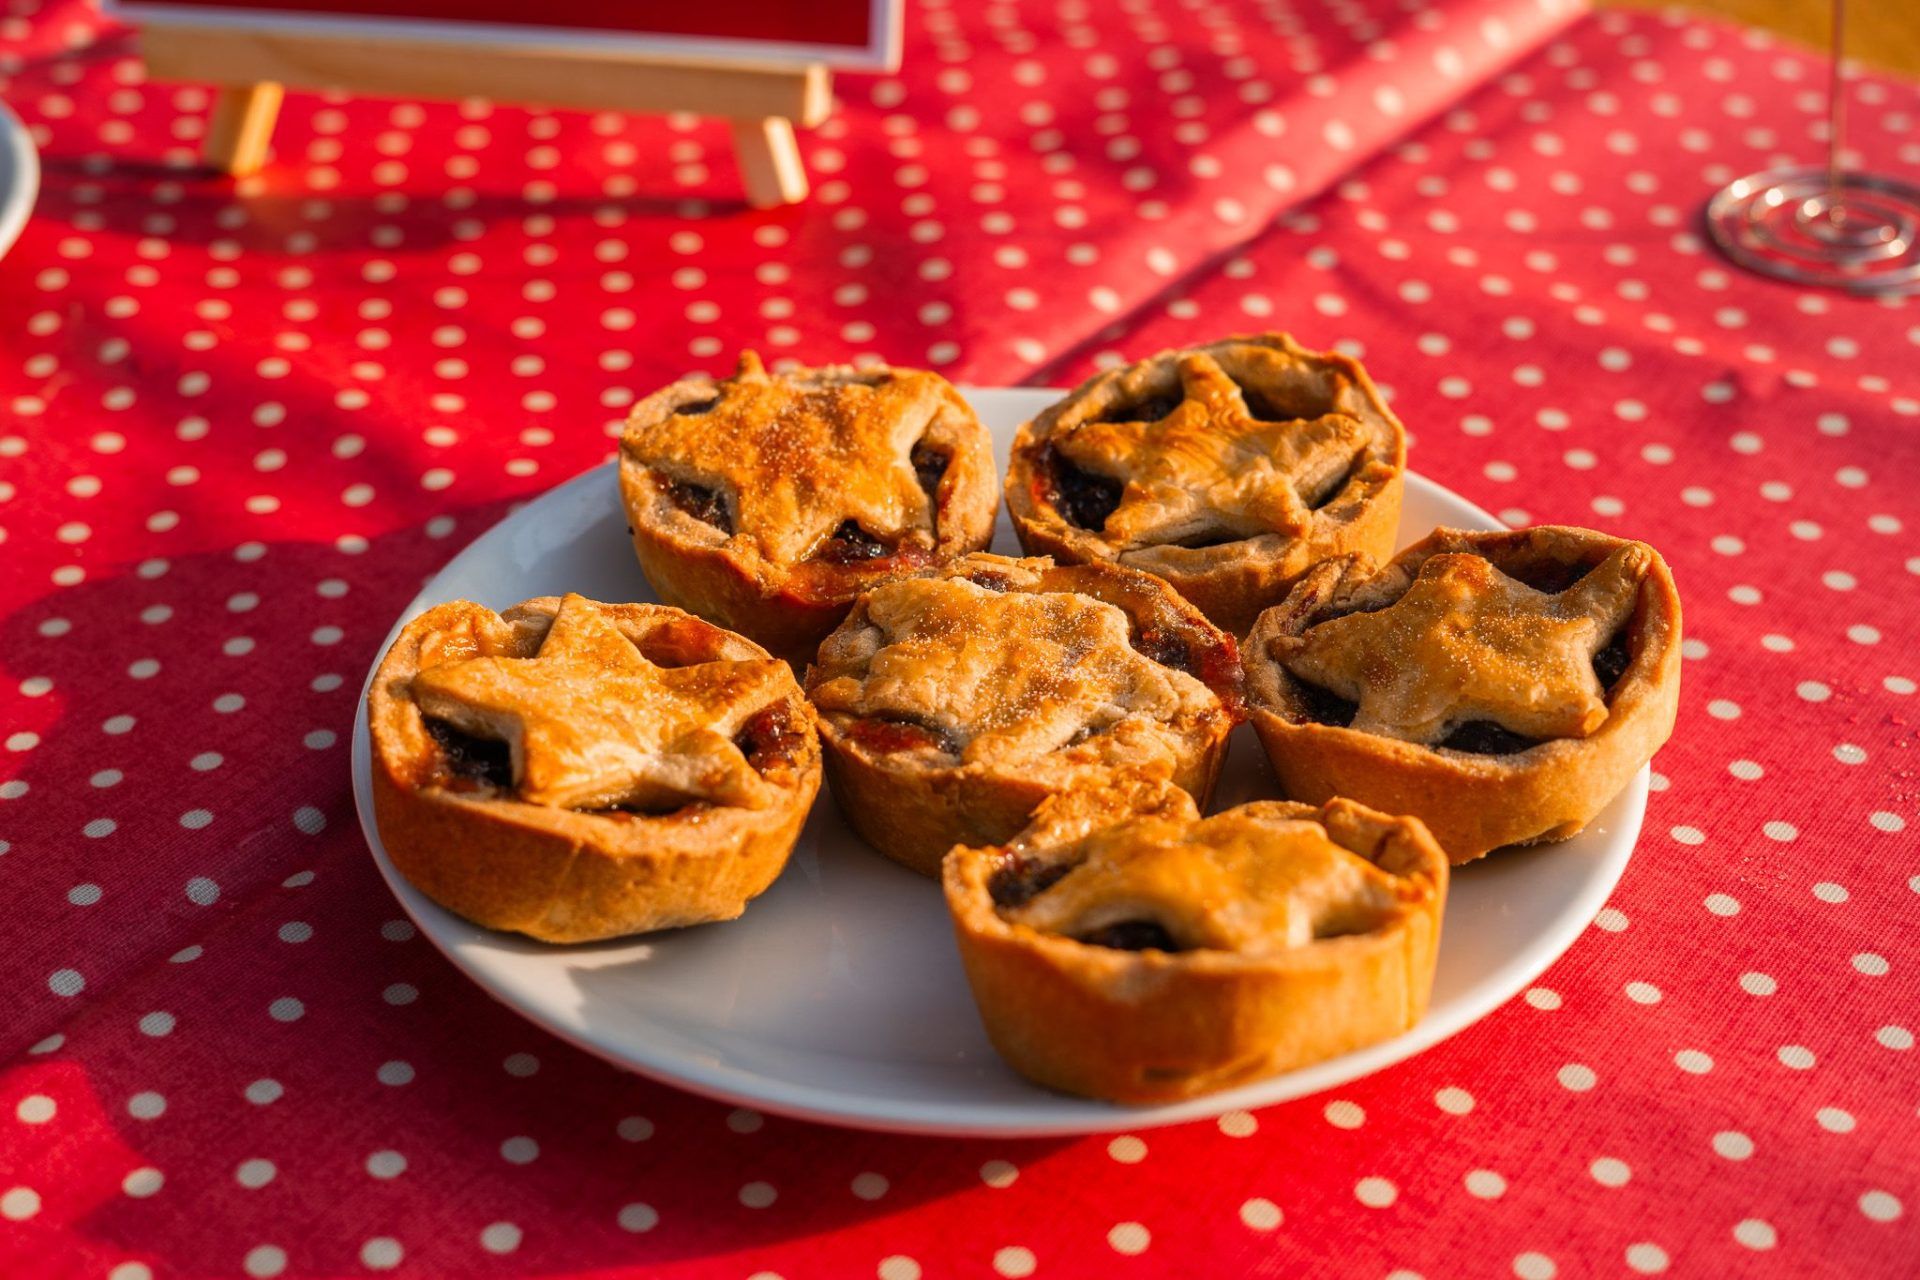 Sun-dappled mince pies on a red spotty tablecloth